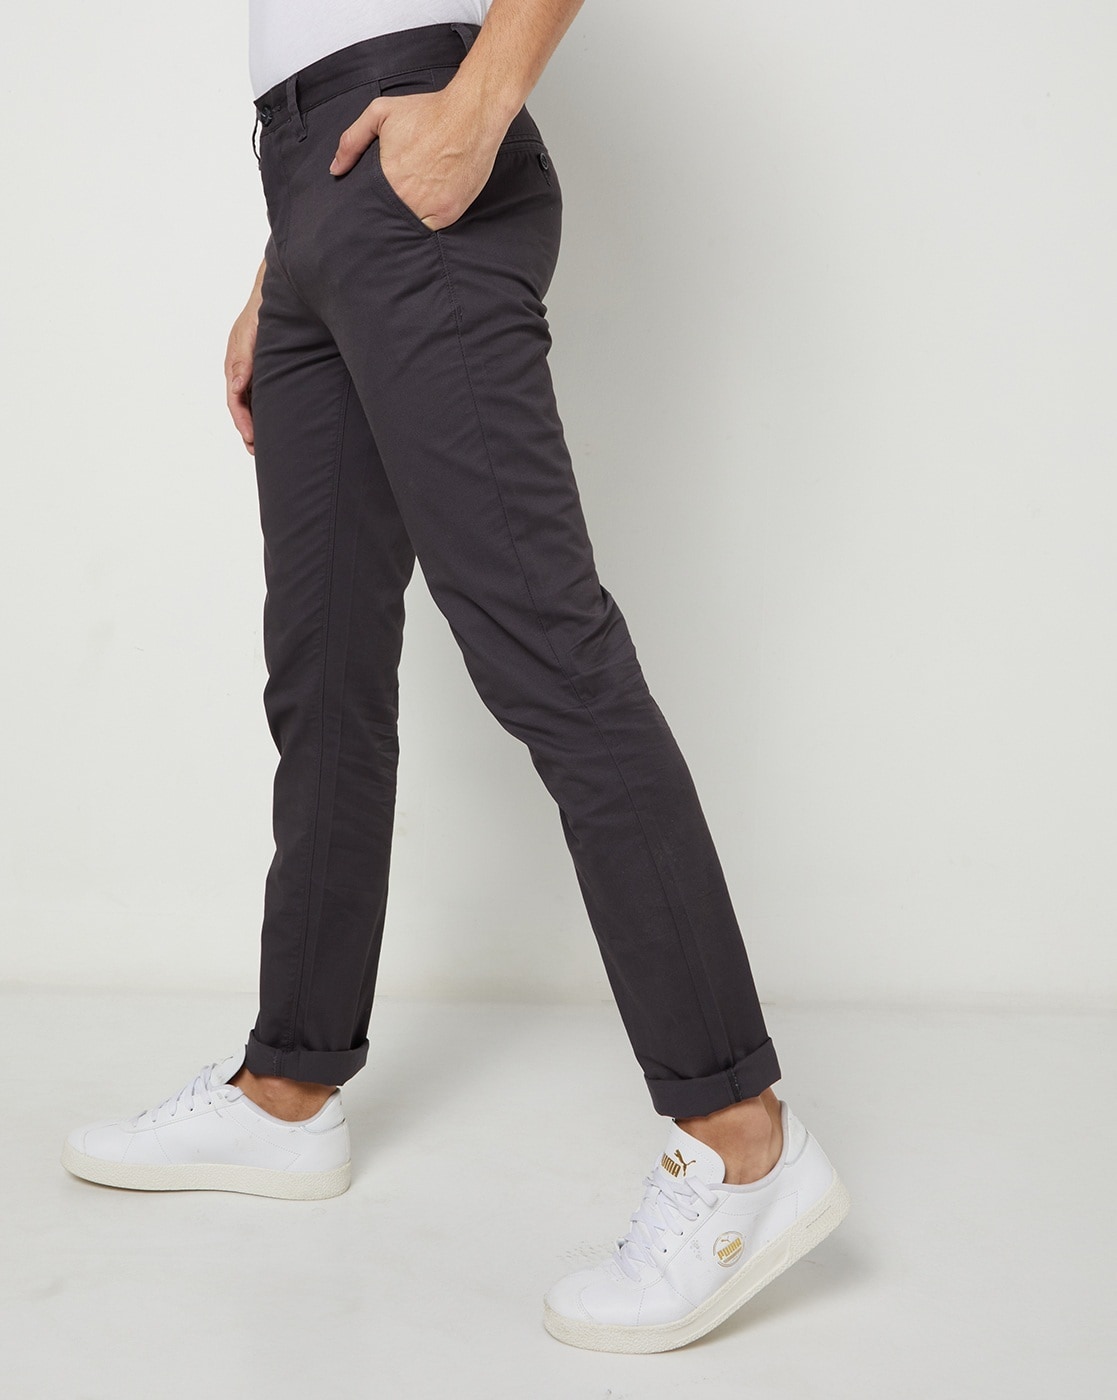 Buy Charcoal Trousers  Pants for Men by JOHN PLAYERS Online  Ajiocom